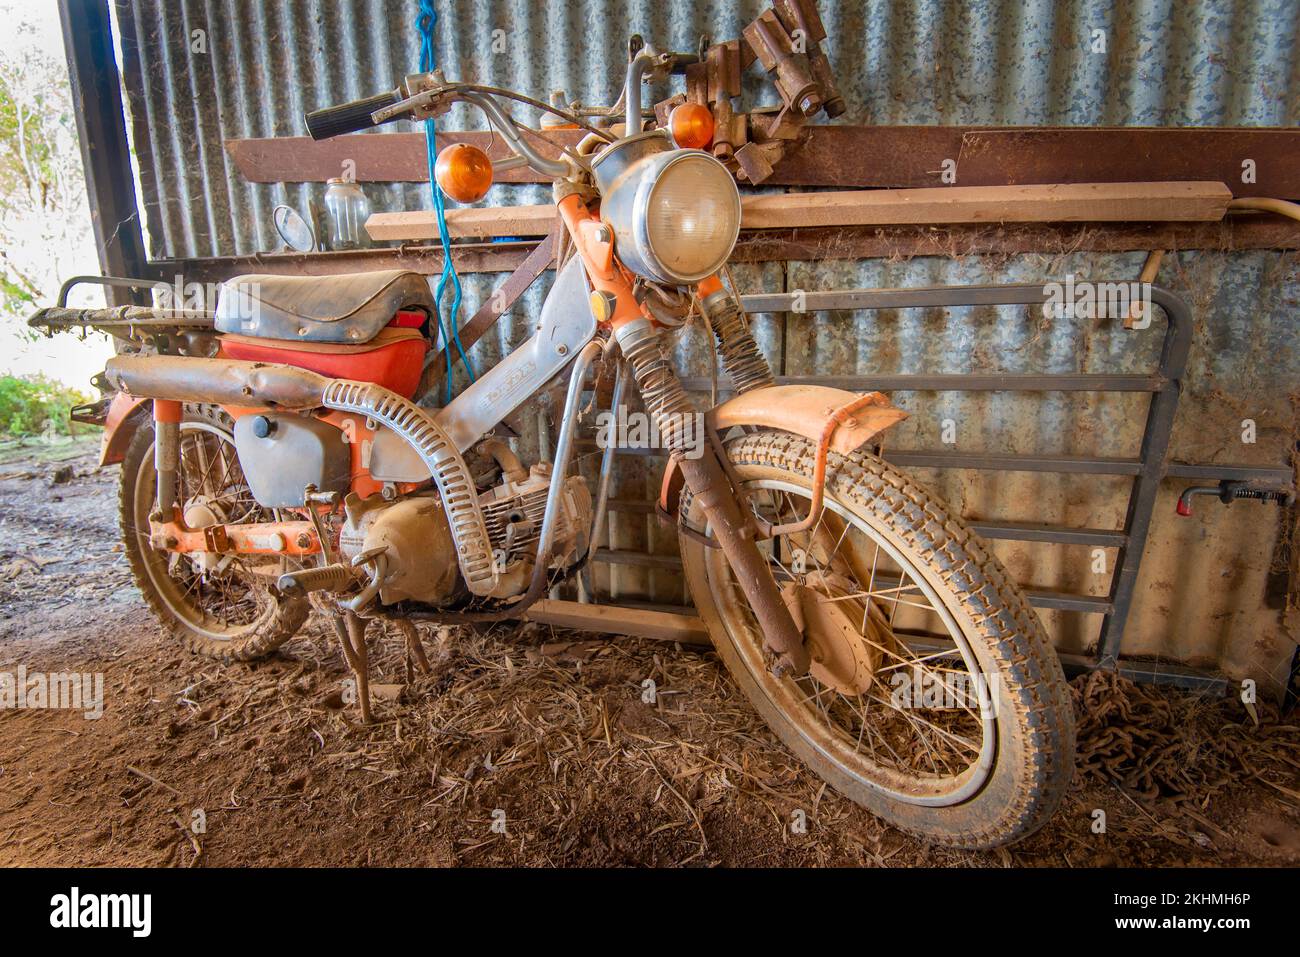 A Honda CT90 collecting dust in a shed in northwest New South Wales, Australia. A small step-through motorcycle by Honda between 1966 and 1979 Stock Photo